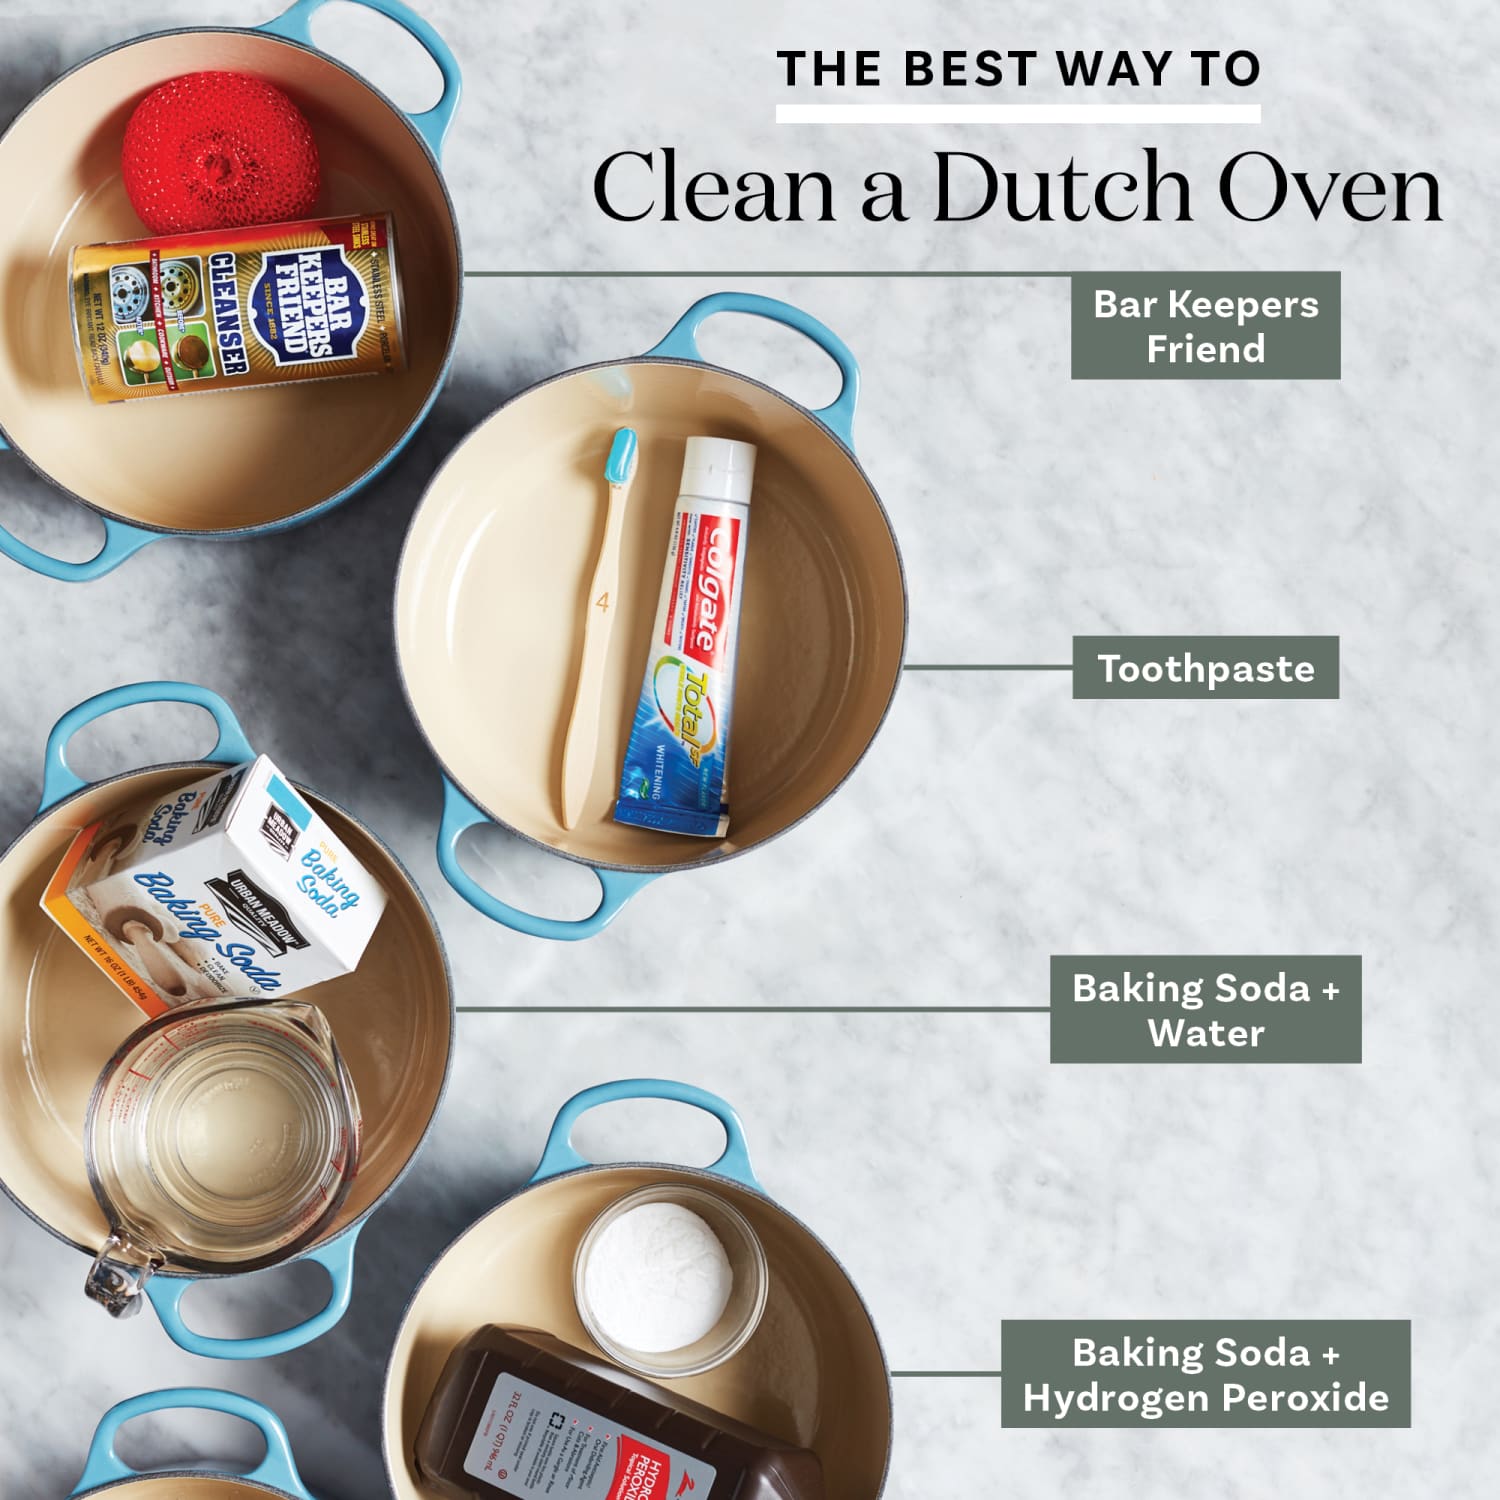 How to Clean Your Le Creuset - Everyday Parisian